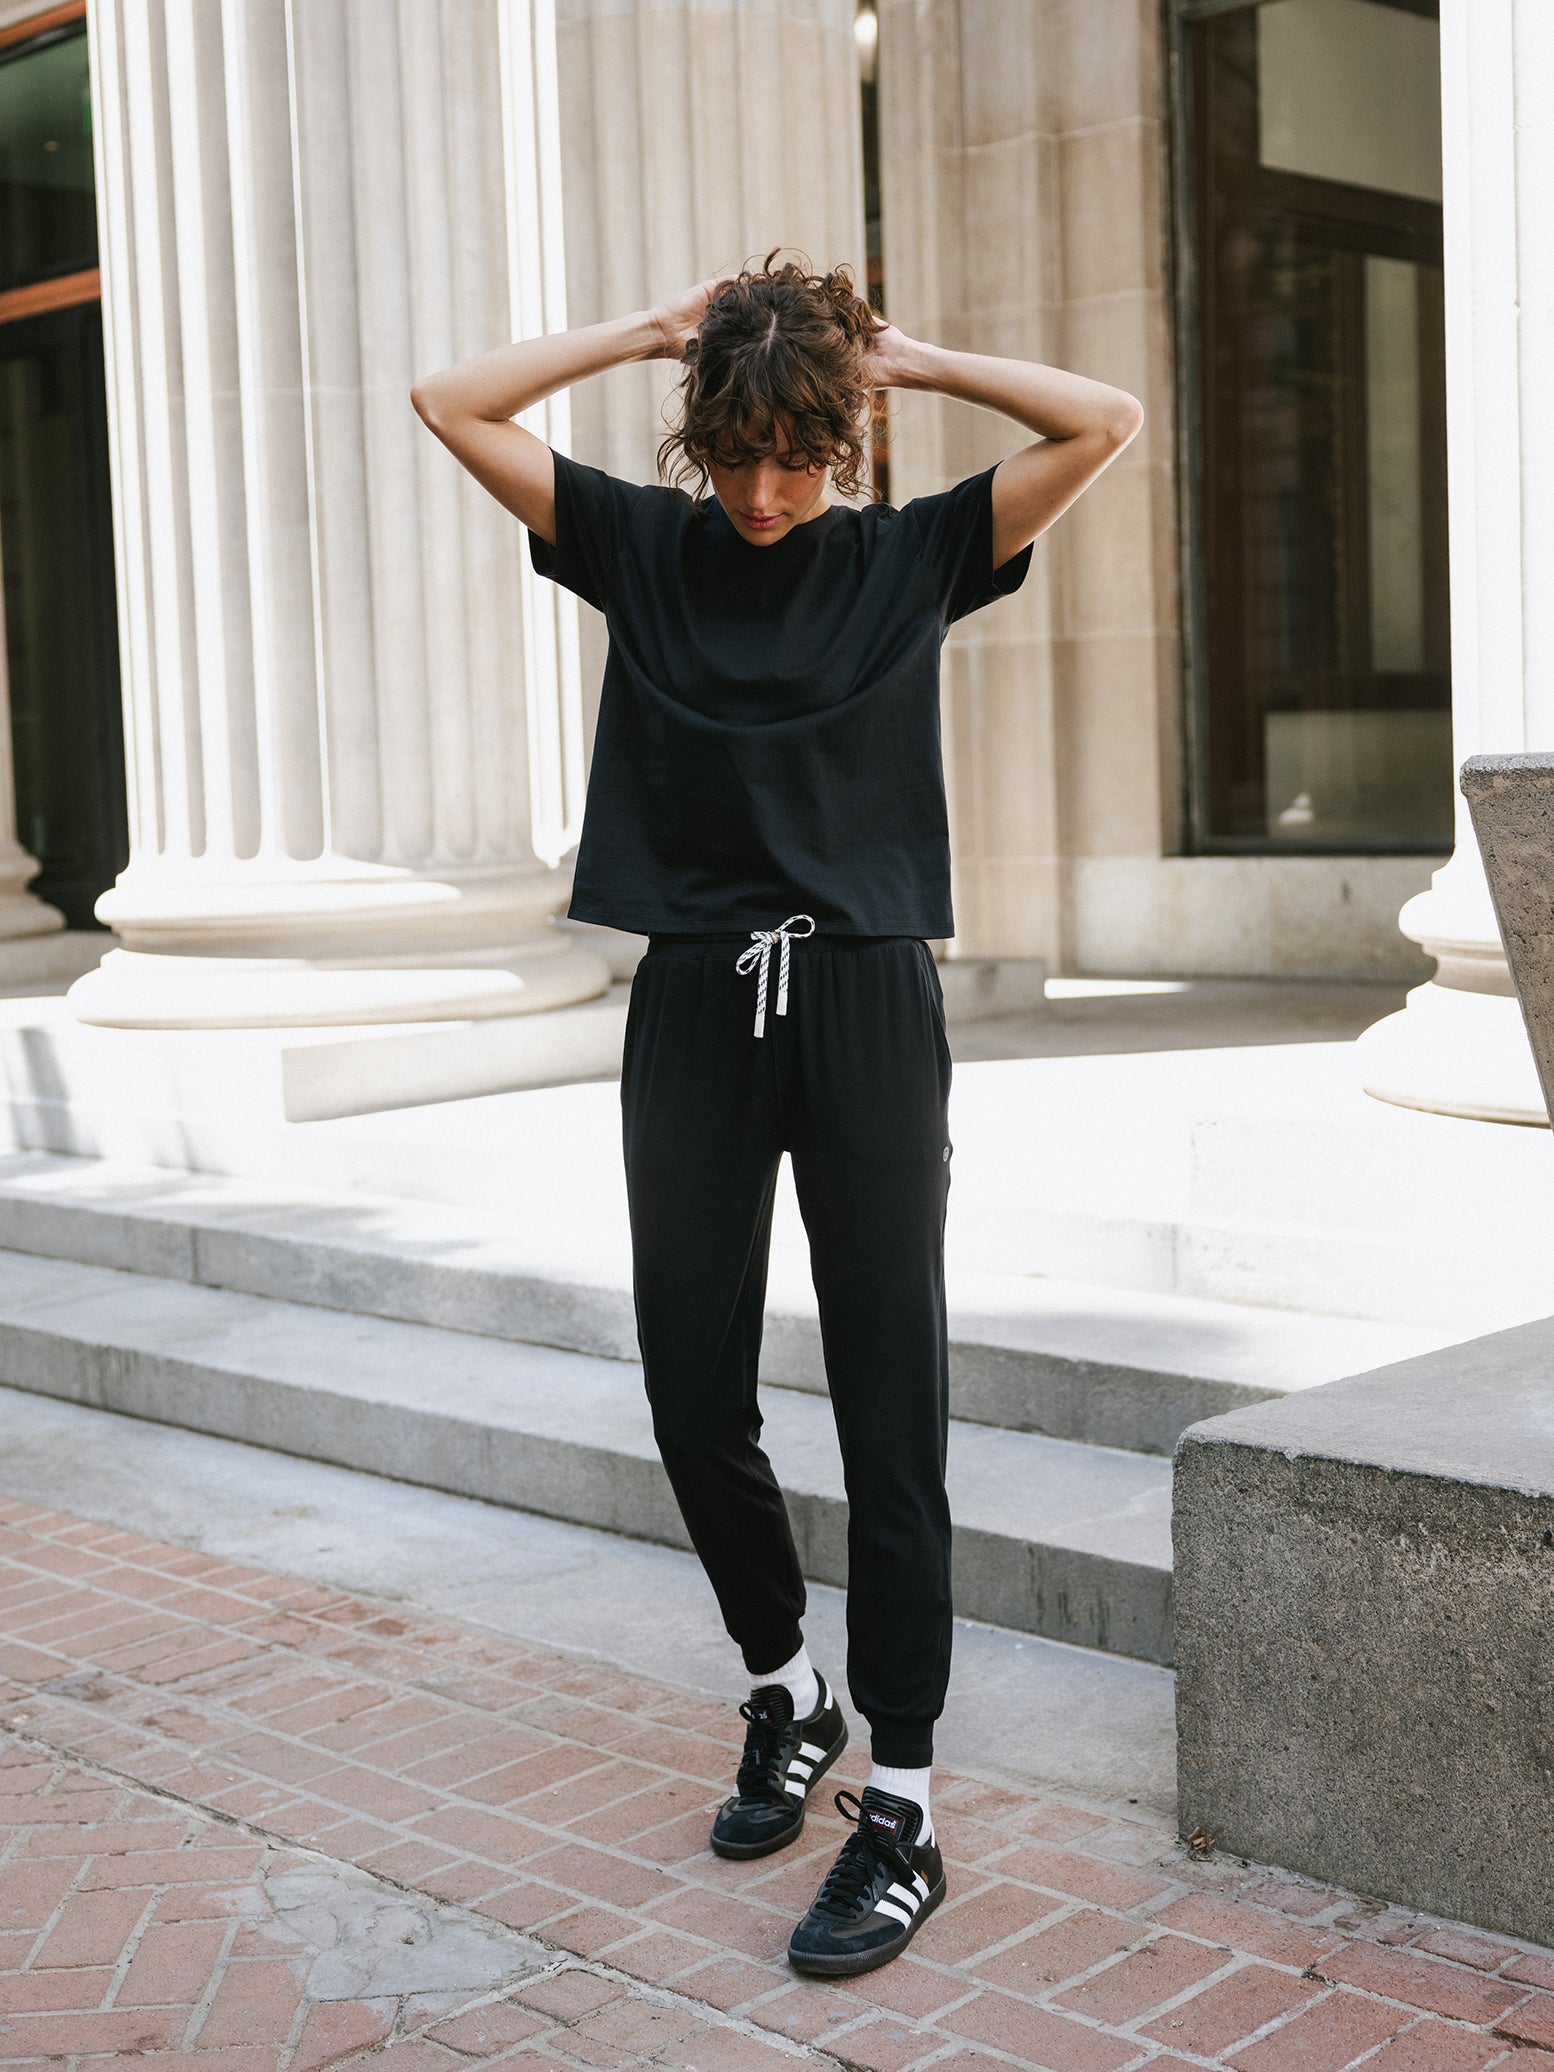 Jet Black Studio Jogger. The Studio Joggers are worn by a woman photographed with a city type background. 